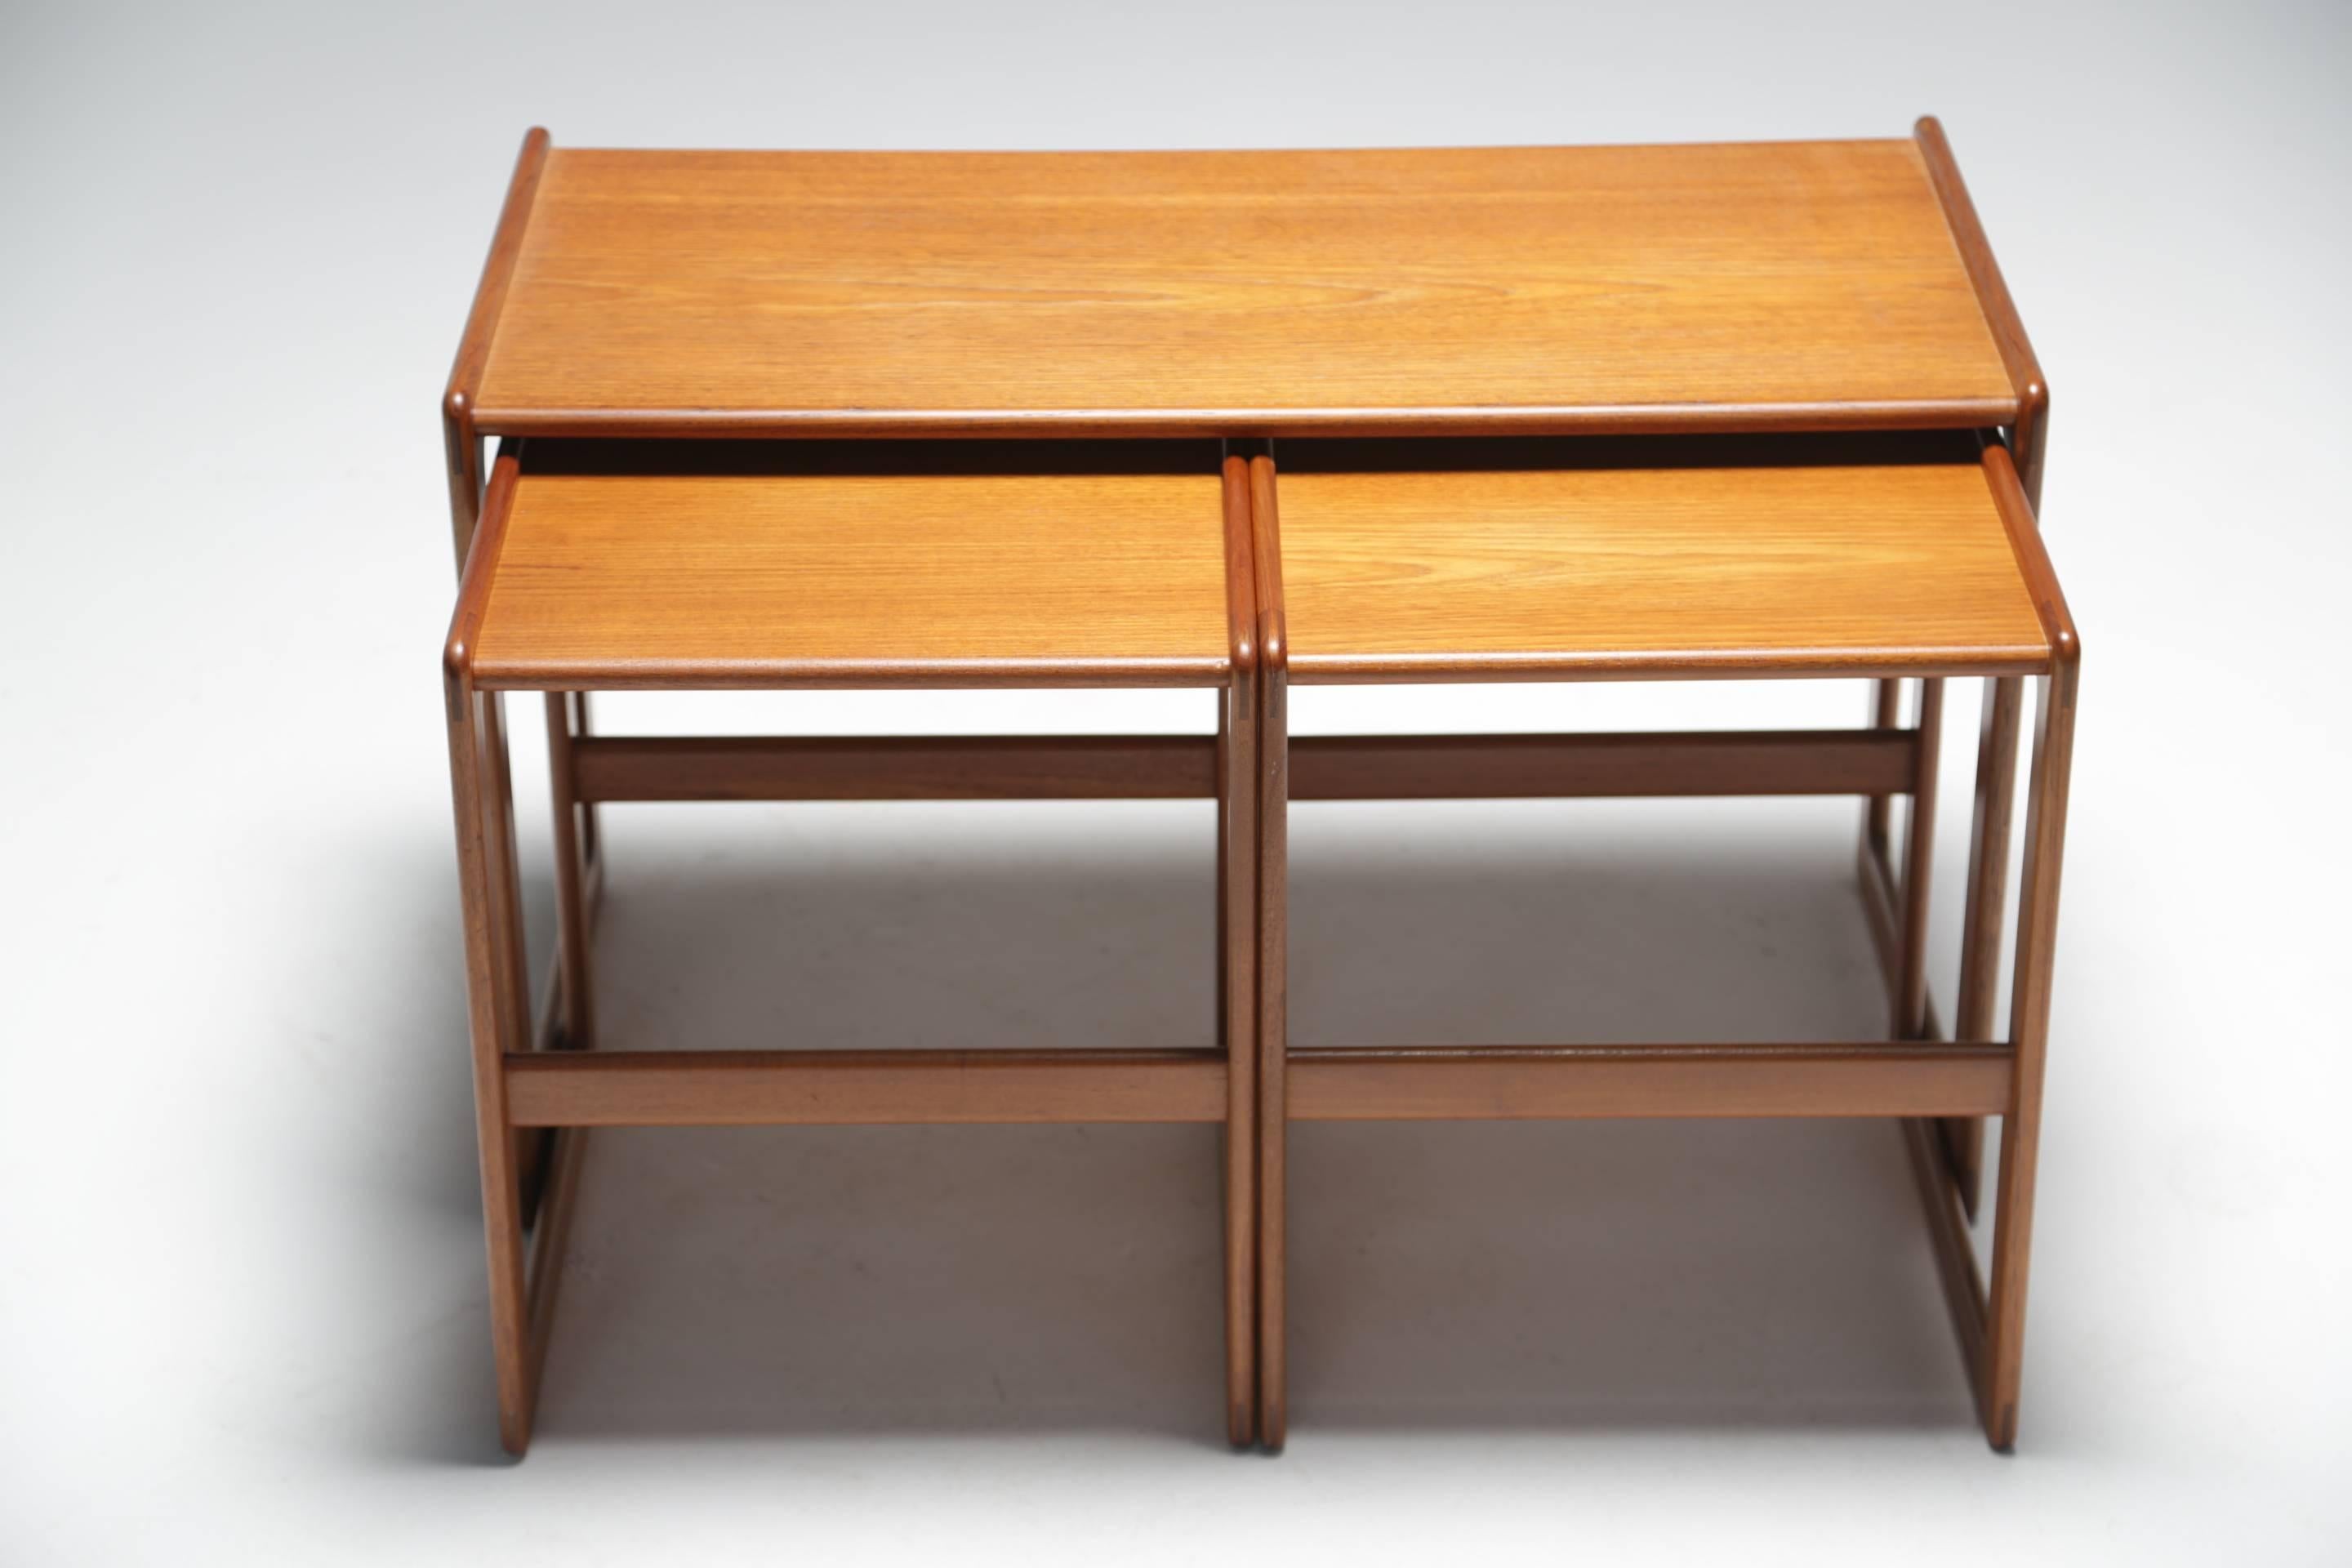 A top quality Scandinavian modern vintage teak set of three nesting tables designed by Arne Hovmand Olsen for Danish furniture maker Mogens Kold.
Beautifully constructed these are a wonderful set of nesting side tables that would compliment any